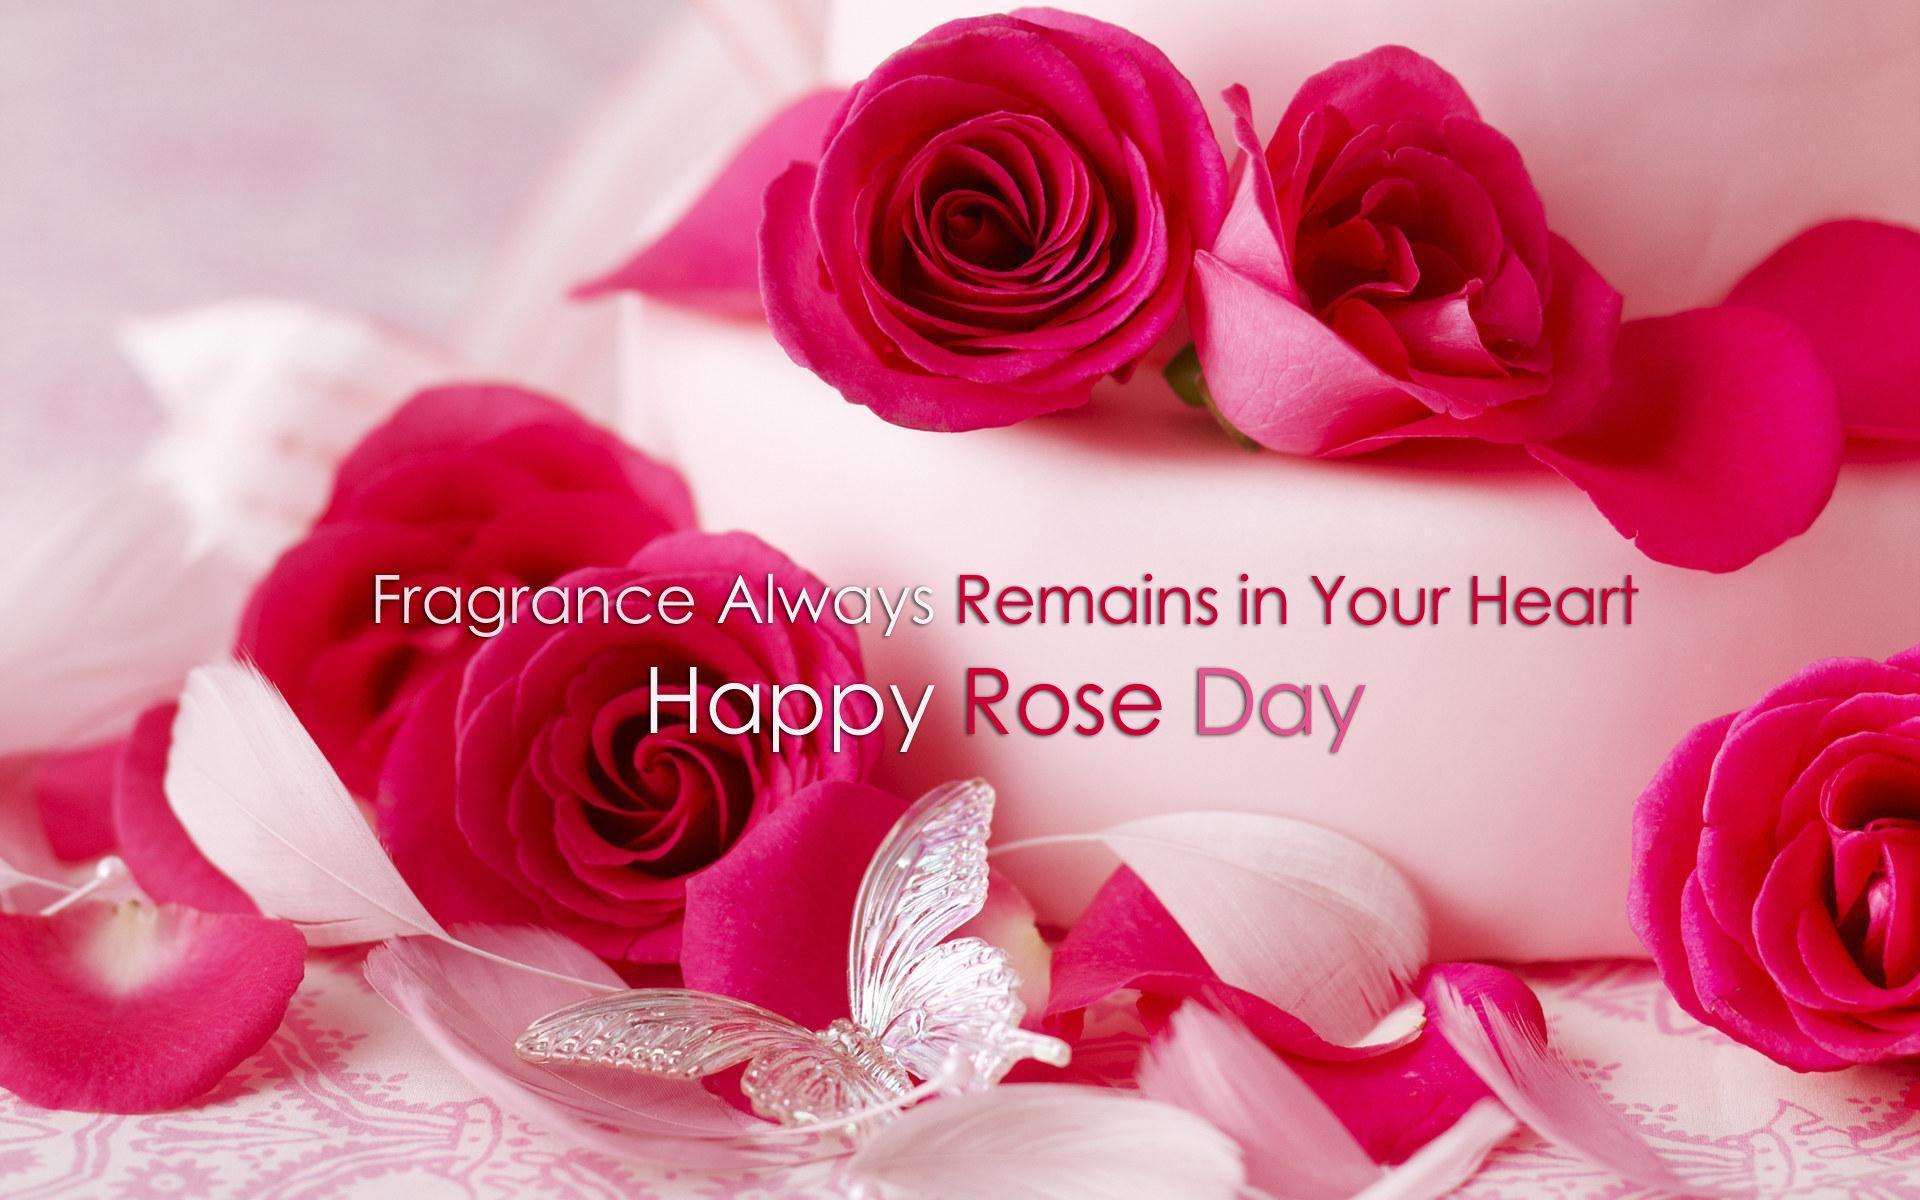 Romantic Rose Day Wishes 2020 Quotes. Beautiful flowers HD wallpaper, Beautiful flowers image, Beautiful flowers picture